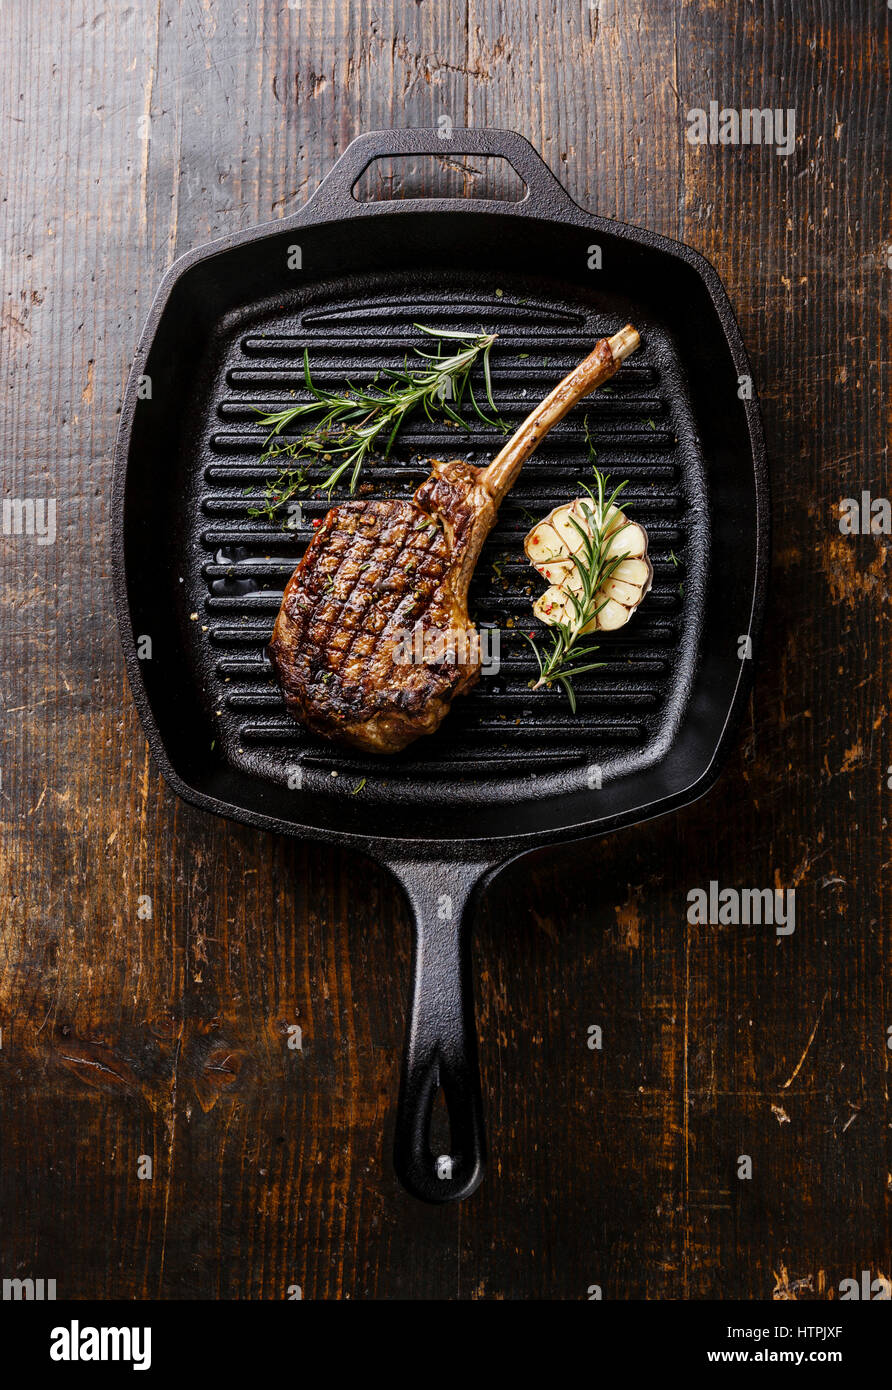 Grilled beef barbecue Veal rib on frying cast iron Grill pan on wooden background Stock Photo